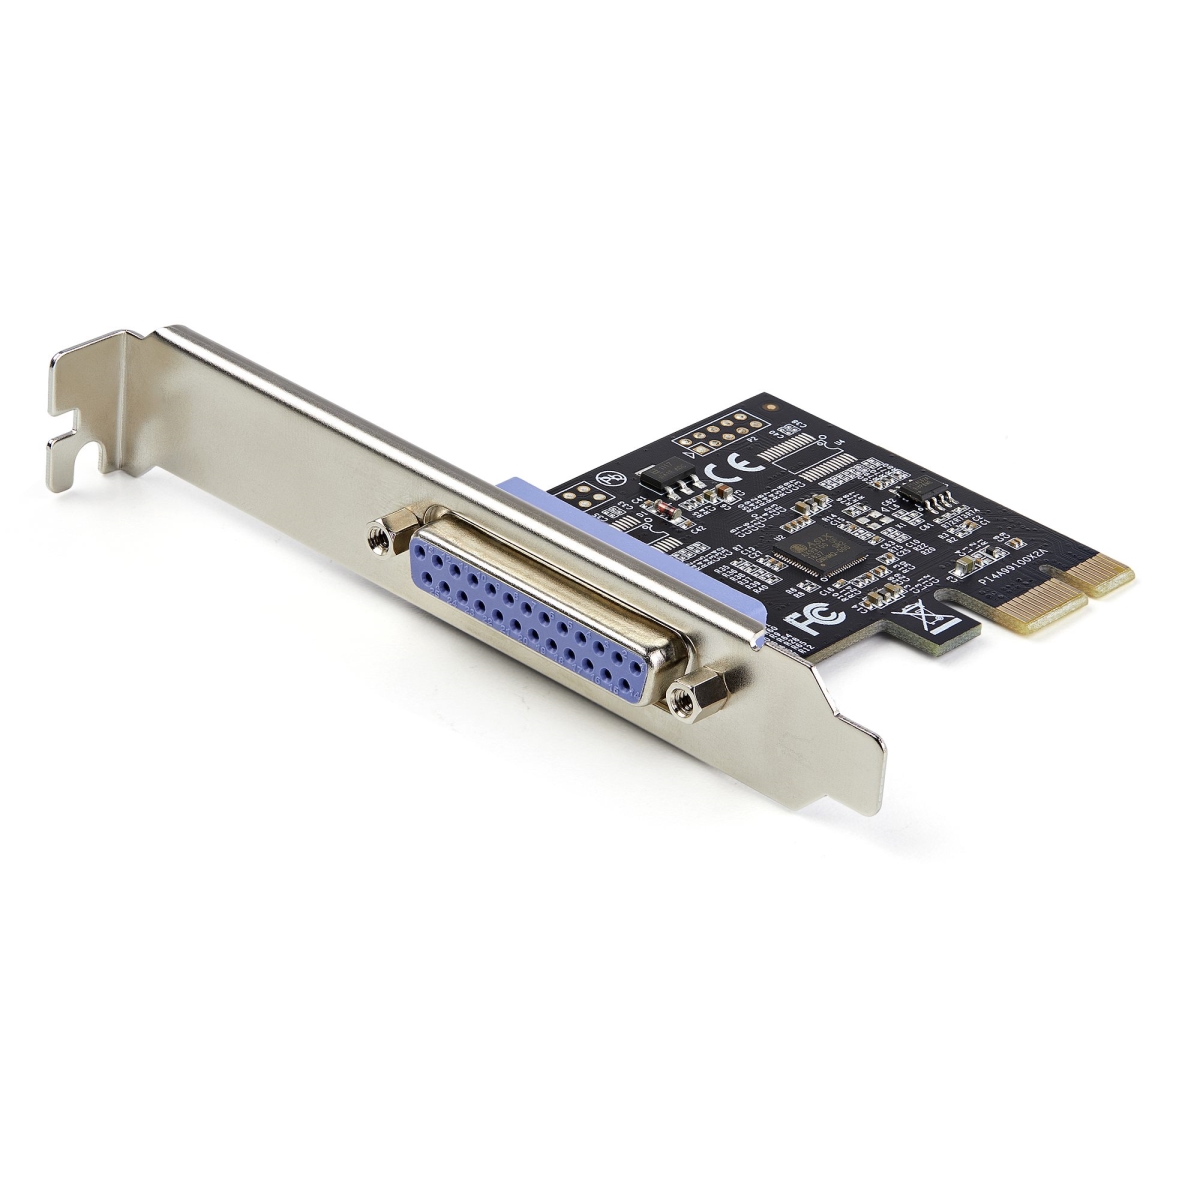 Picture of Startech PEX1P2 Parallel PCIe Card Controller with DB25 Parallel Port